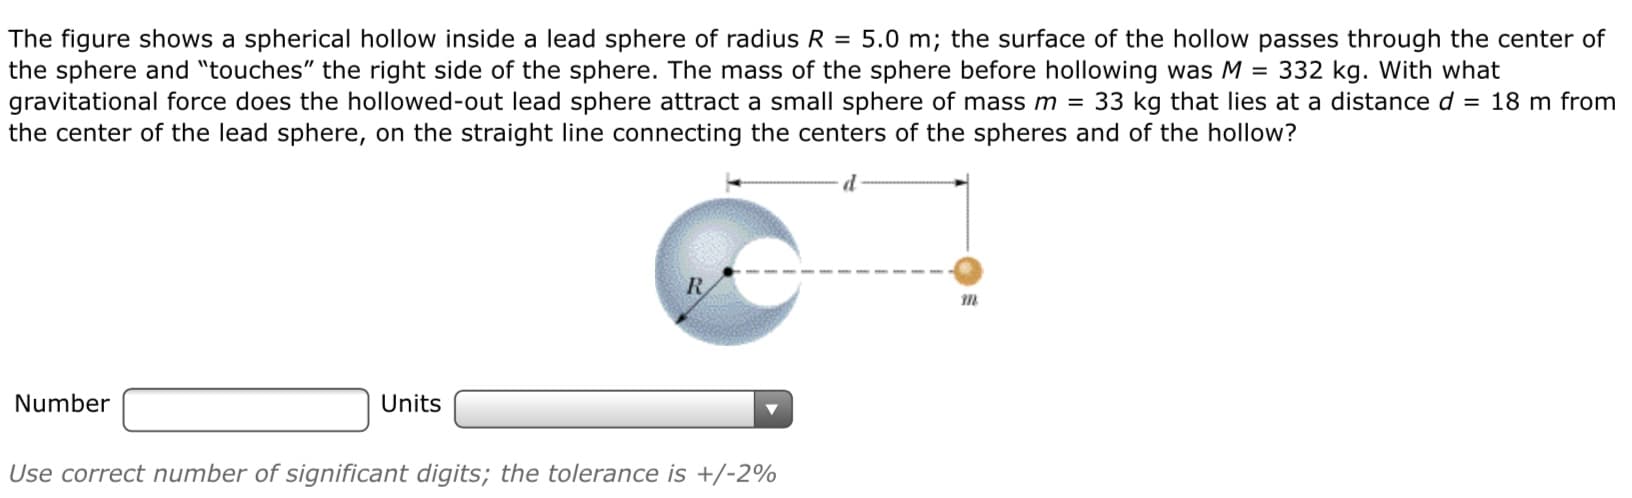 The figure shows a spherical hollow inside a lead sphere of radius R = 5.0 m; the surface of the hollow passes through the center of
the sphere and "touches" the right side of the sphere. The mass of the sphere before hollowing was M = 332 kg. With what
gravitational force does the hollowed-out lead sphere attract a small sphere of mass m = 33 kg that lies at a distance d = 18 m from
the center of the lead sphere, on the straight line connecting the centers of the spheres and of the hollow?
R
Number
Units
Use correct number of significant digits; the tolerance is +/-2%
